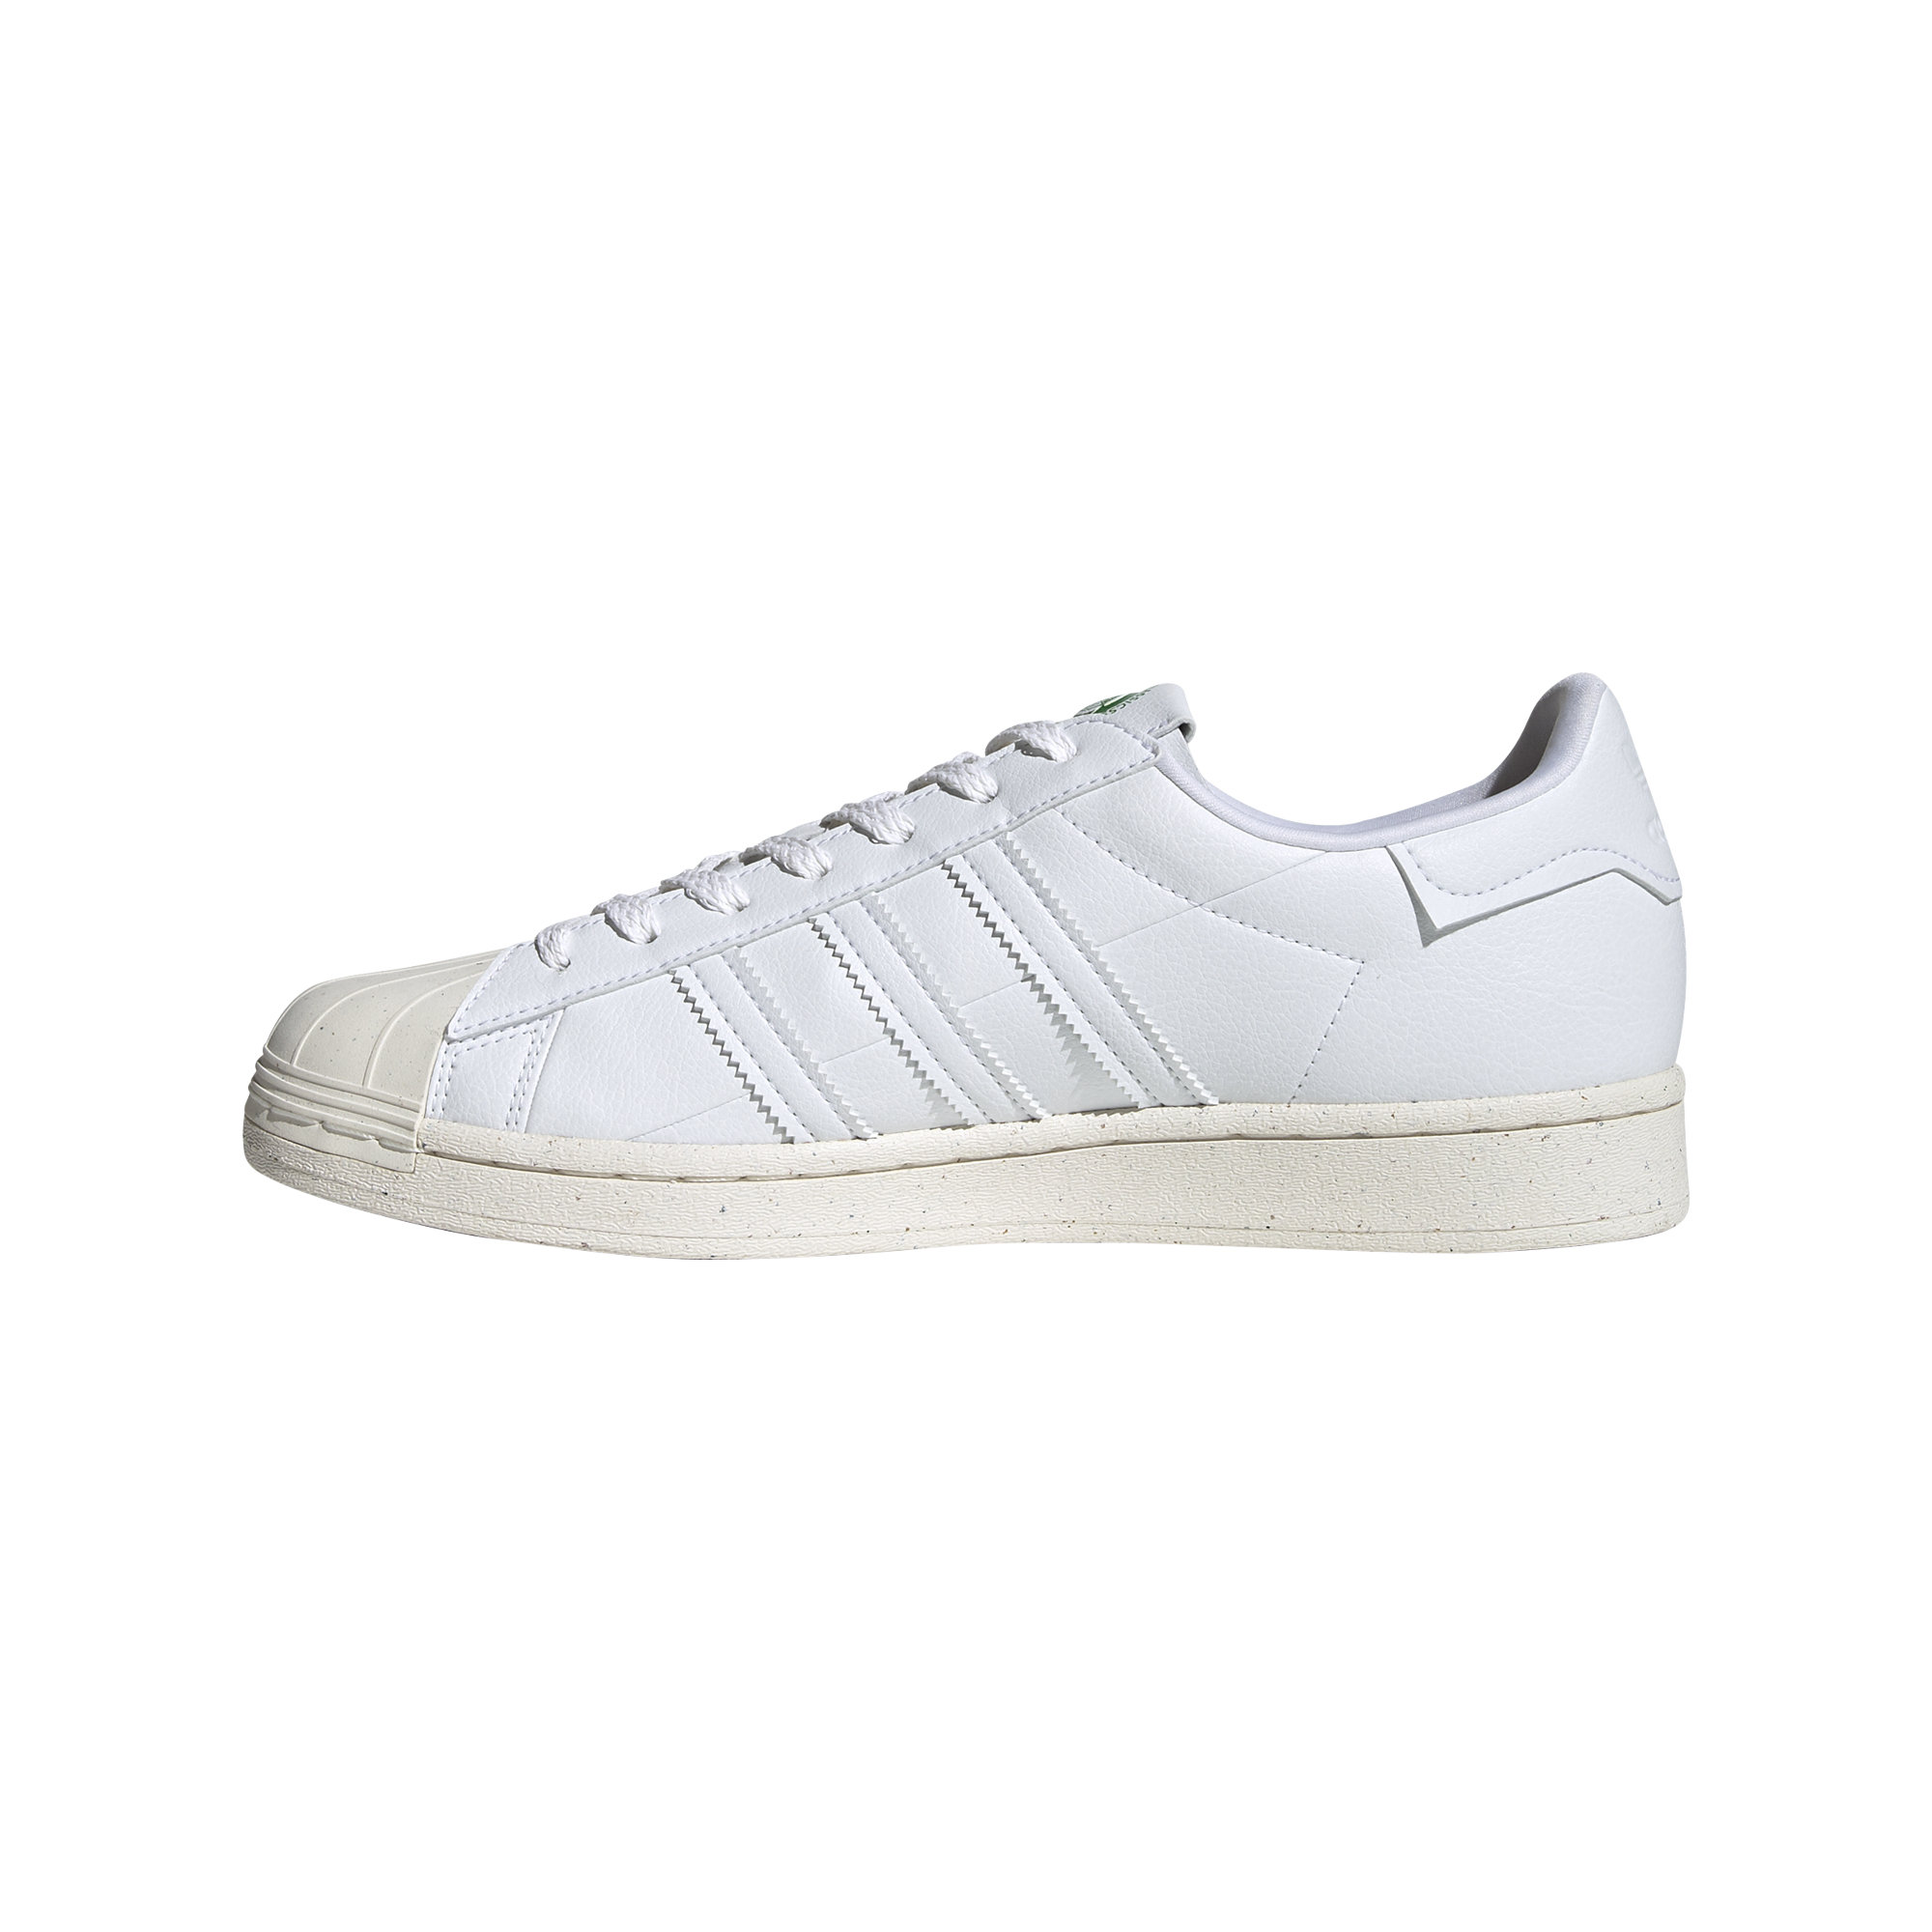 adidas Superstar Clean Classics Ftw White/ Off White/ Green 59008